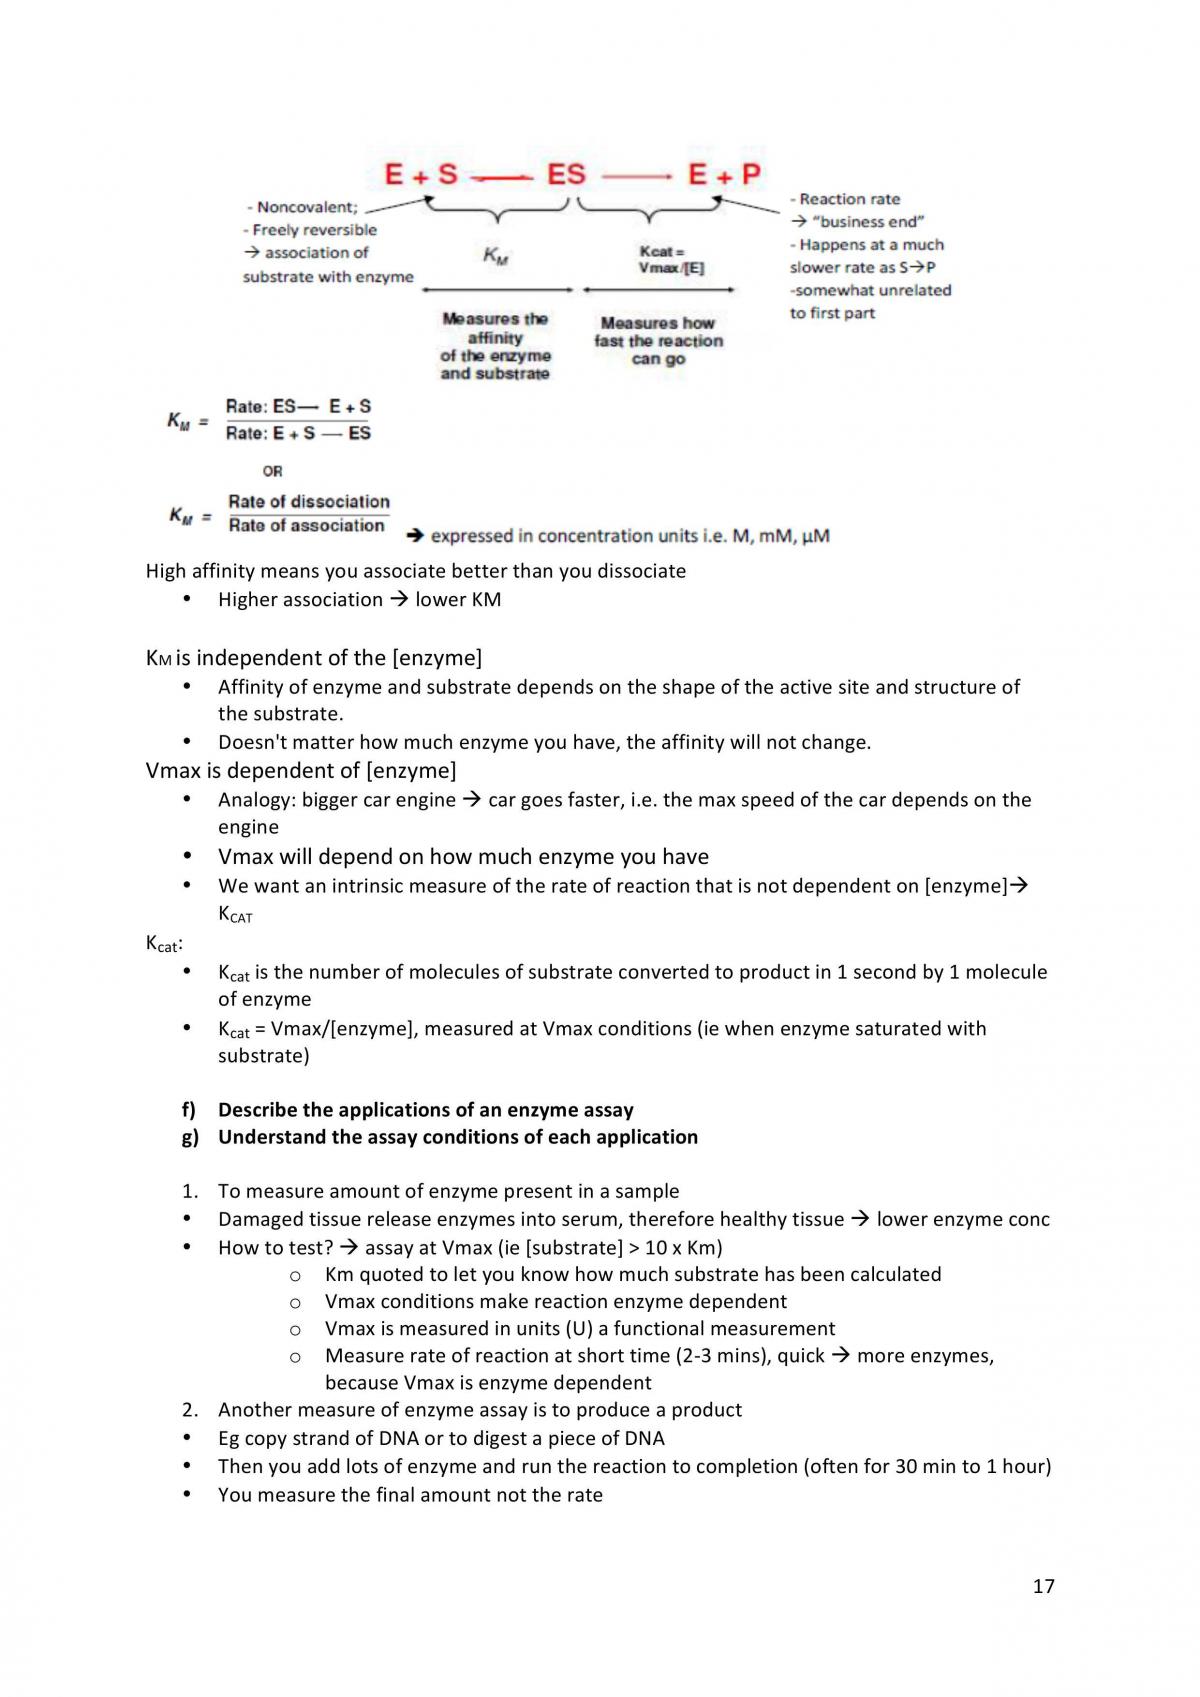 MBLG Notes - Summary, USYD  - Page 17